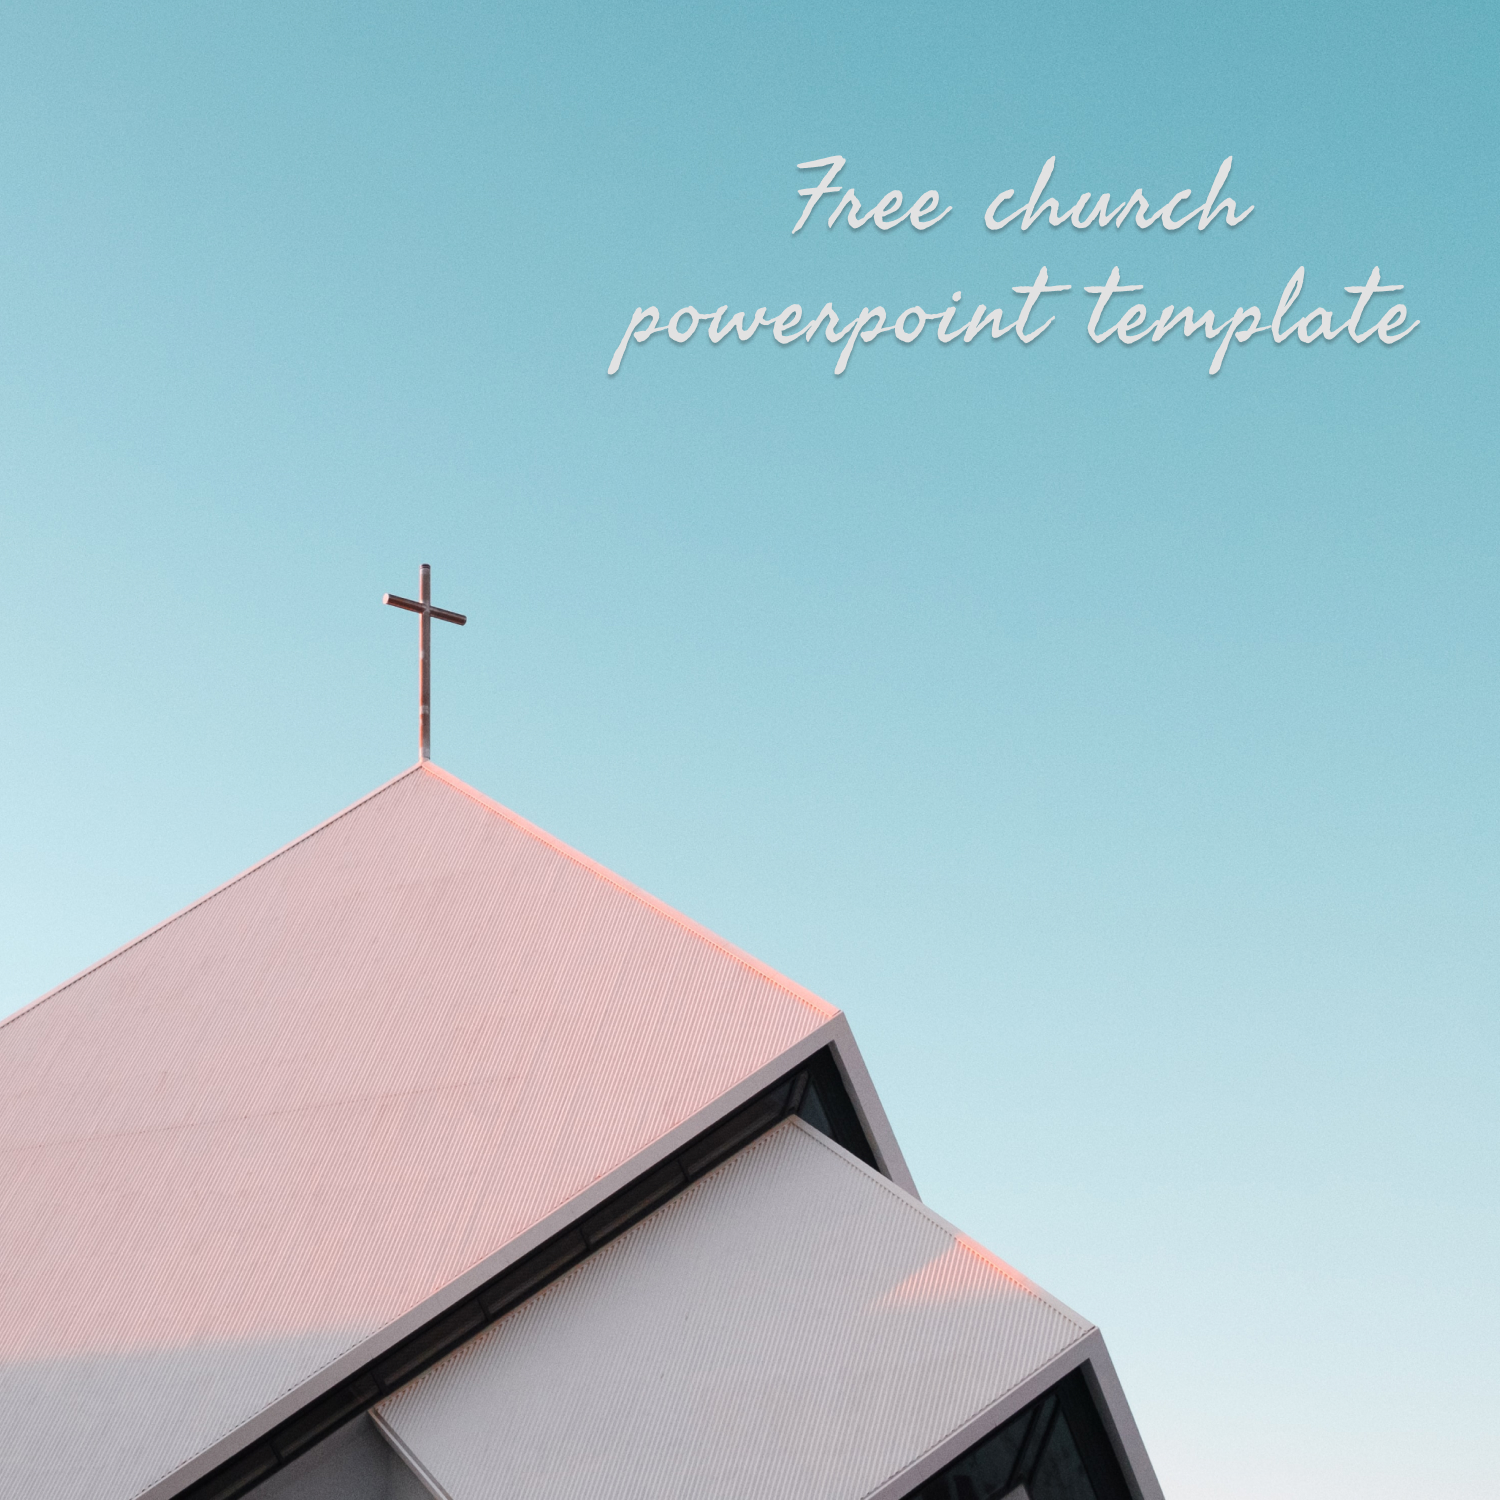 Prints with church powerpoint template.